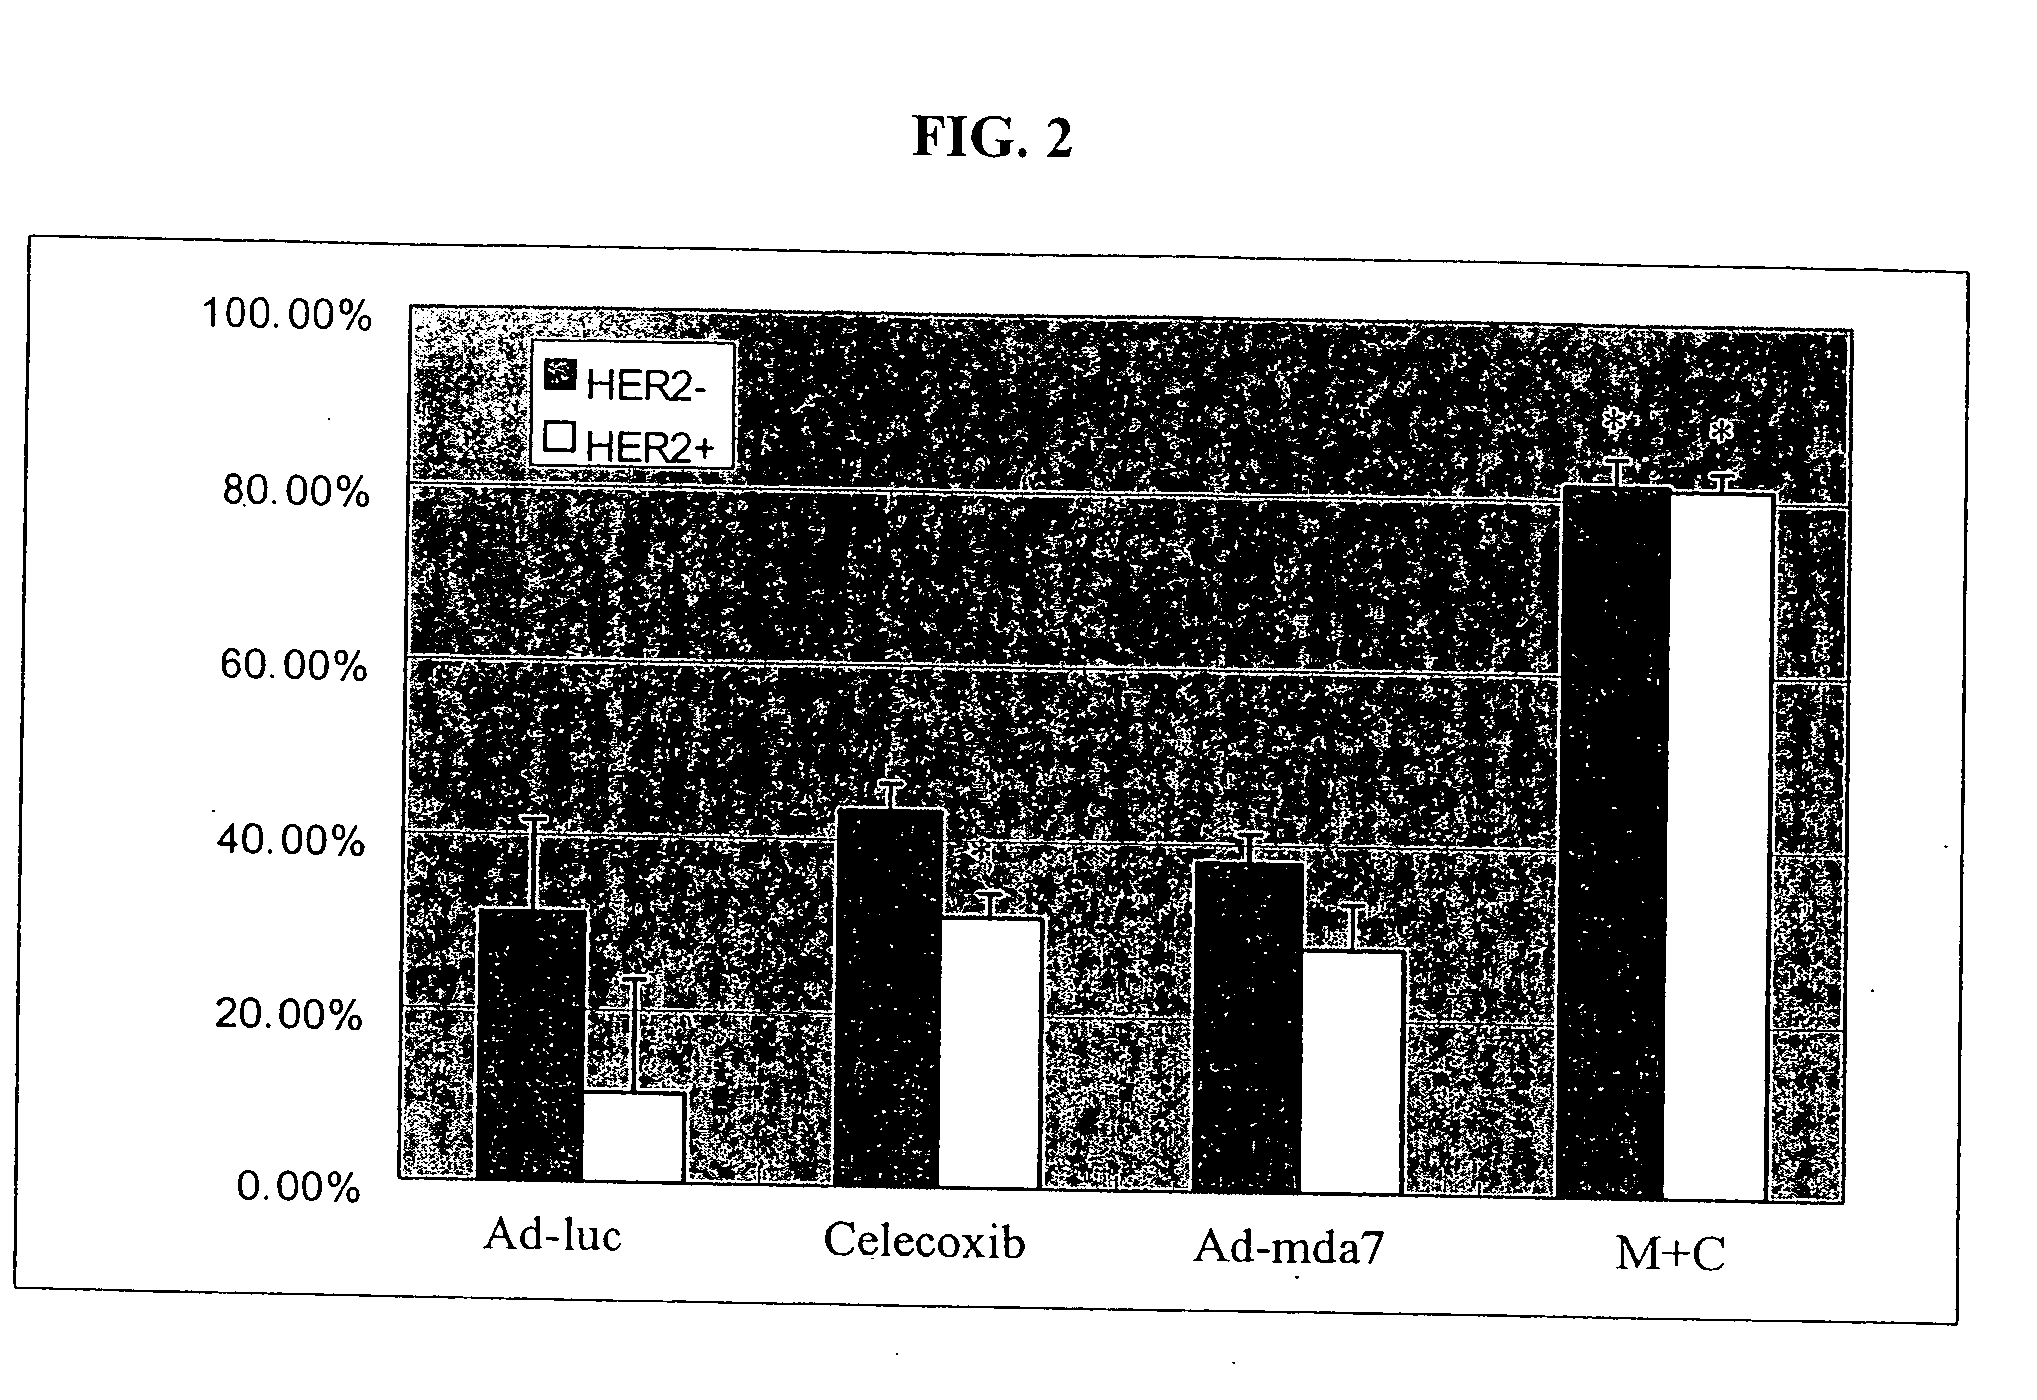 Compositions and methods involving MDA-7 for the treatment of cancer